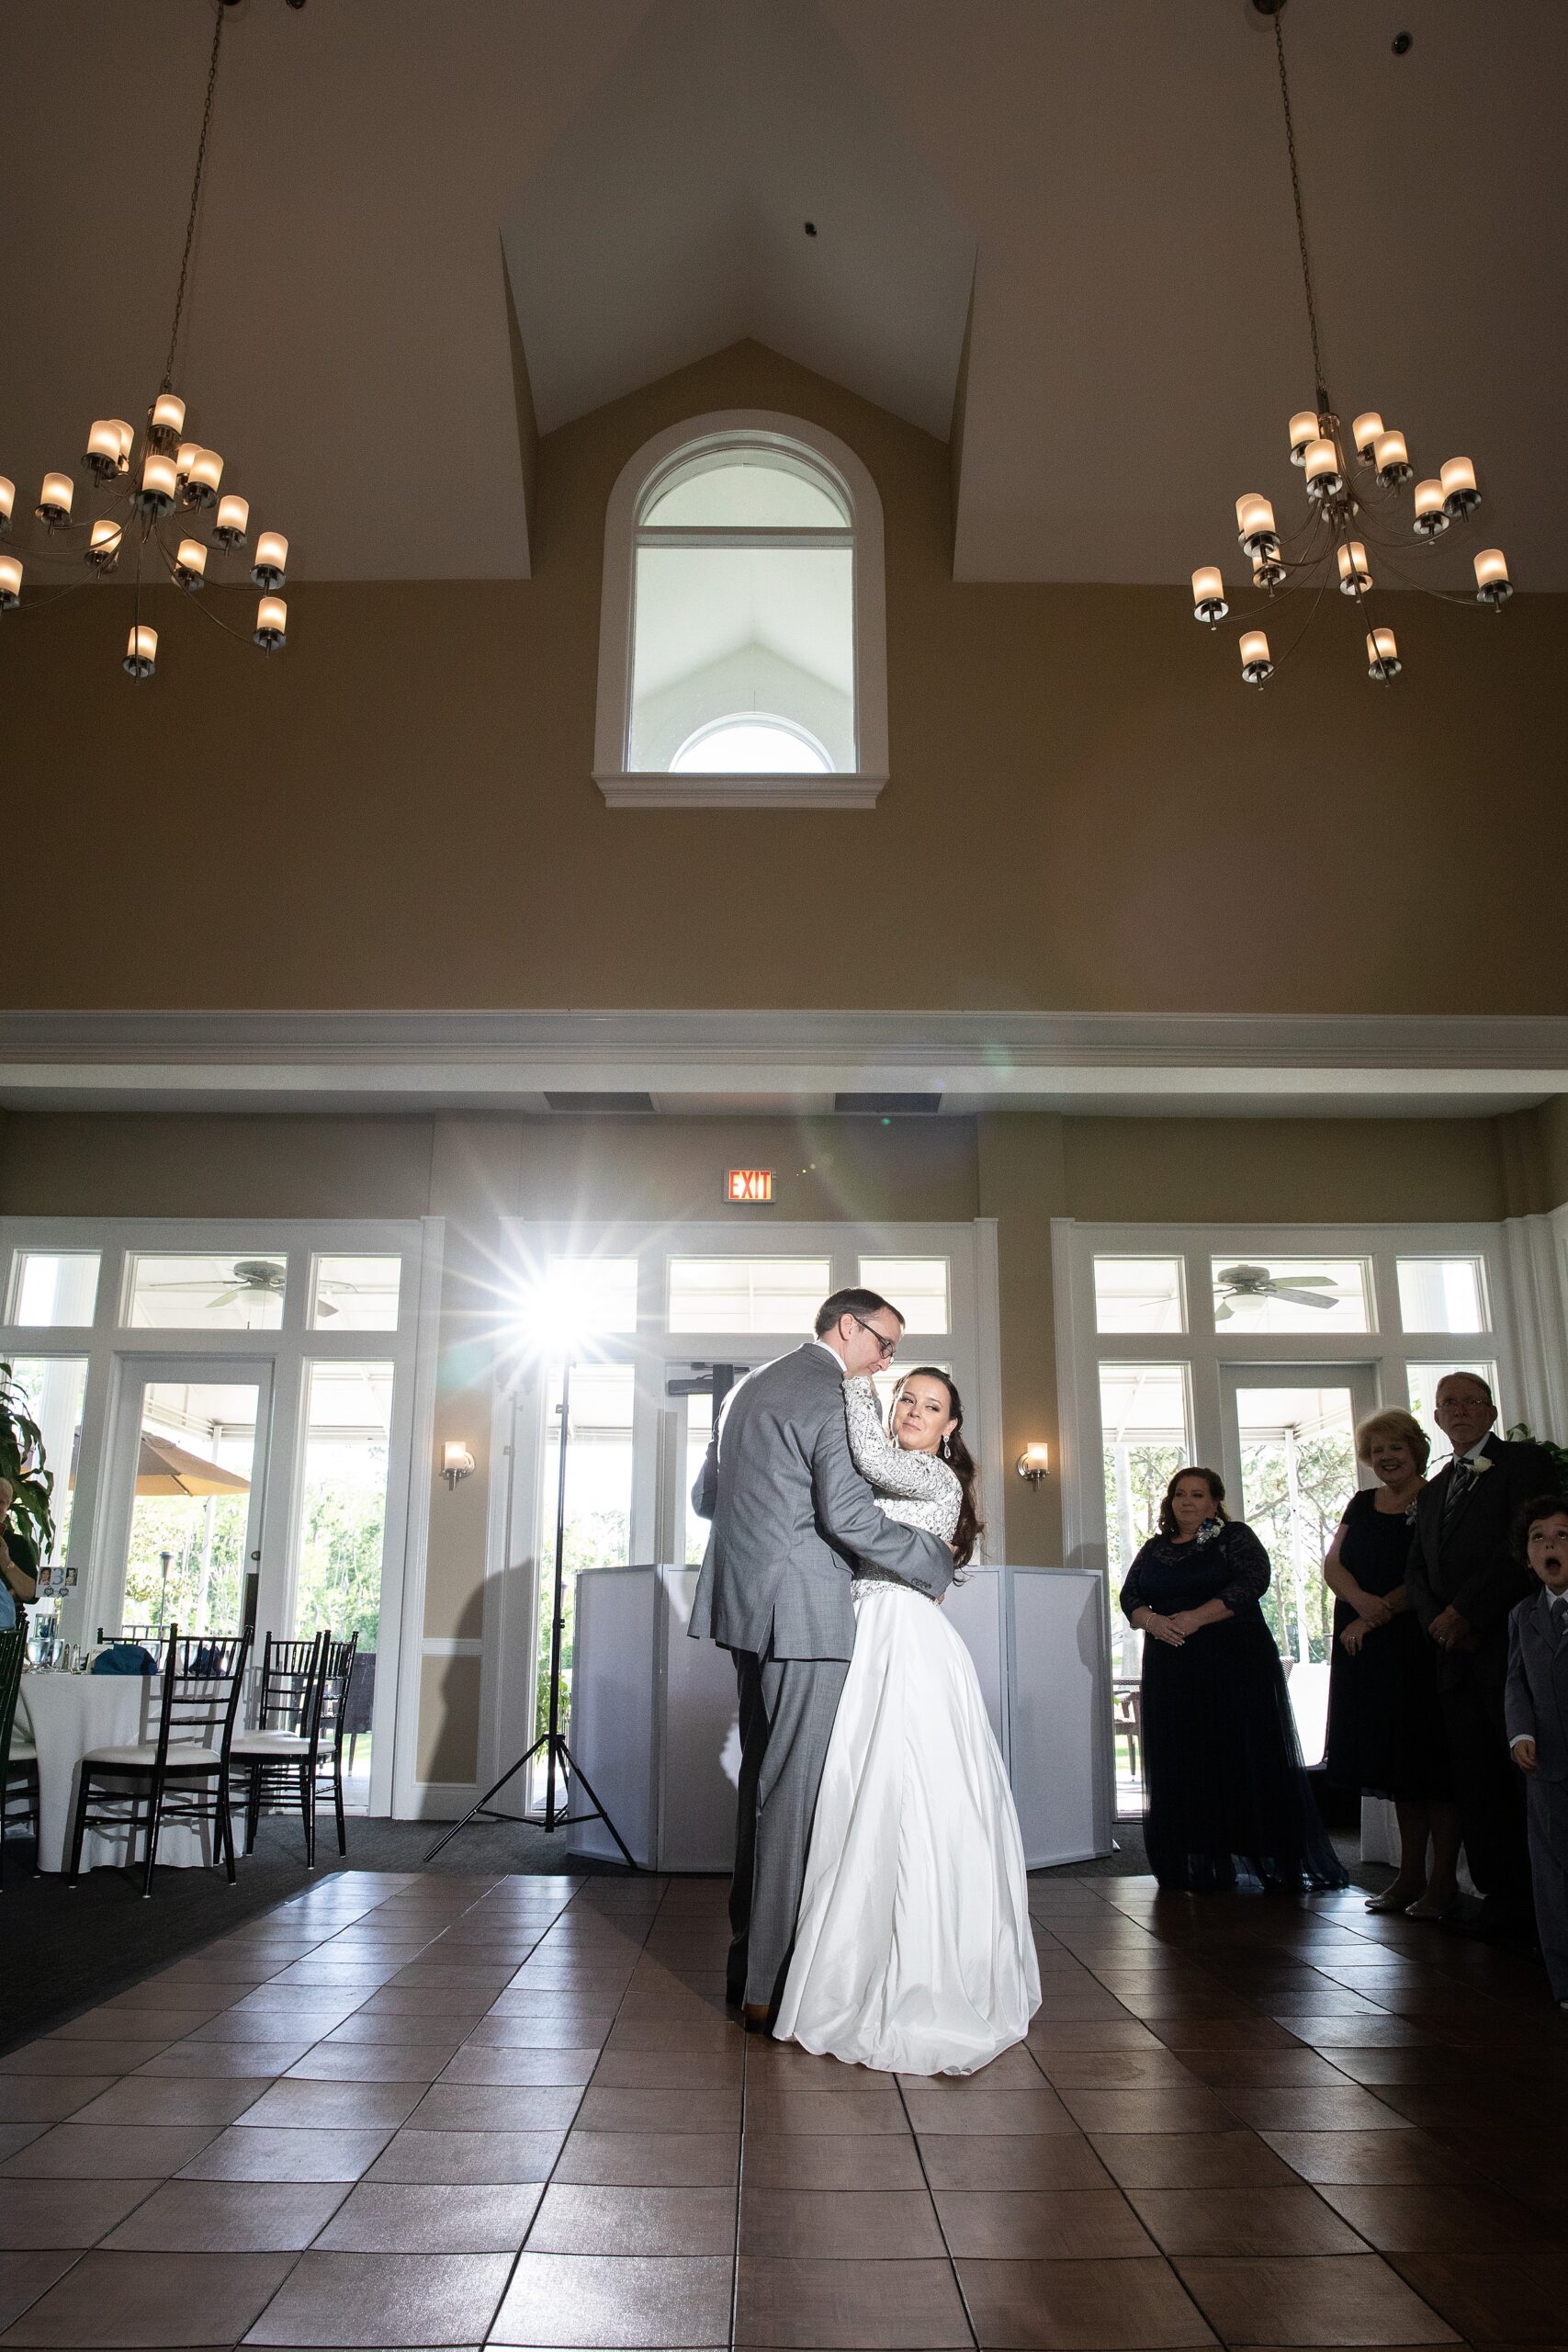 Newlyweds dance for the first time on the dance floor at their deercreek country club wedding reception surrounded by guests